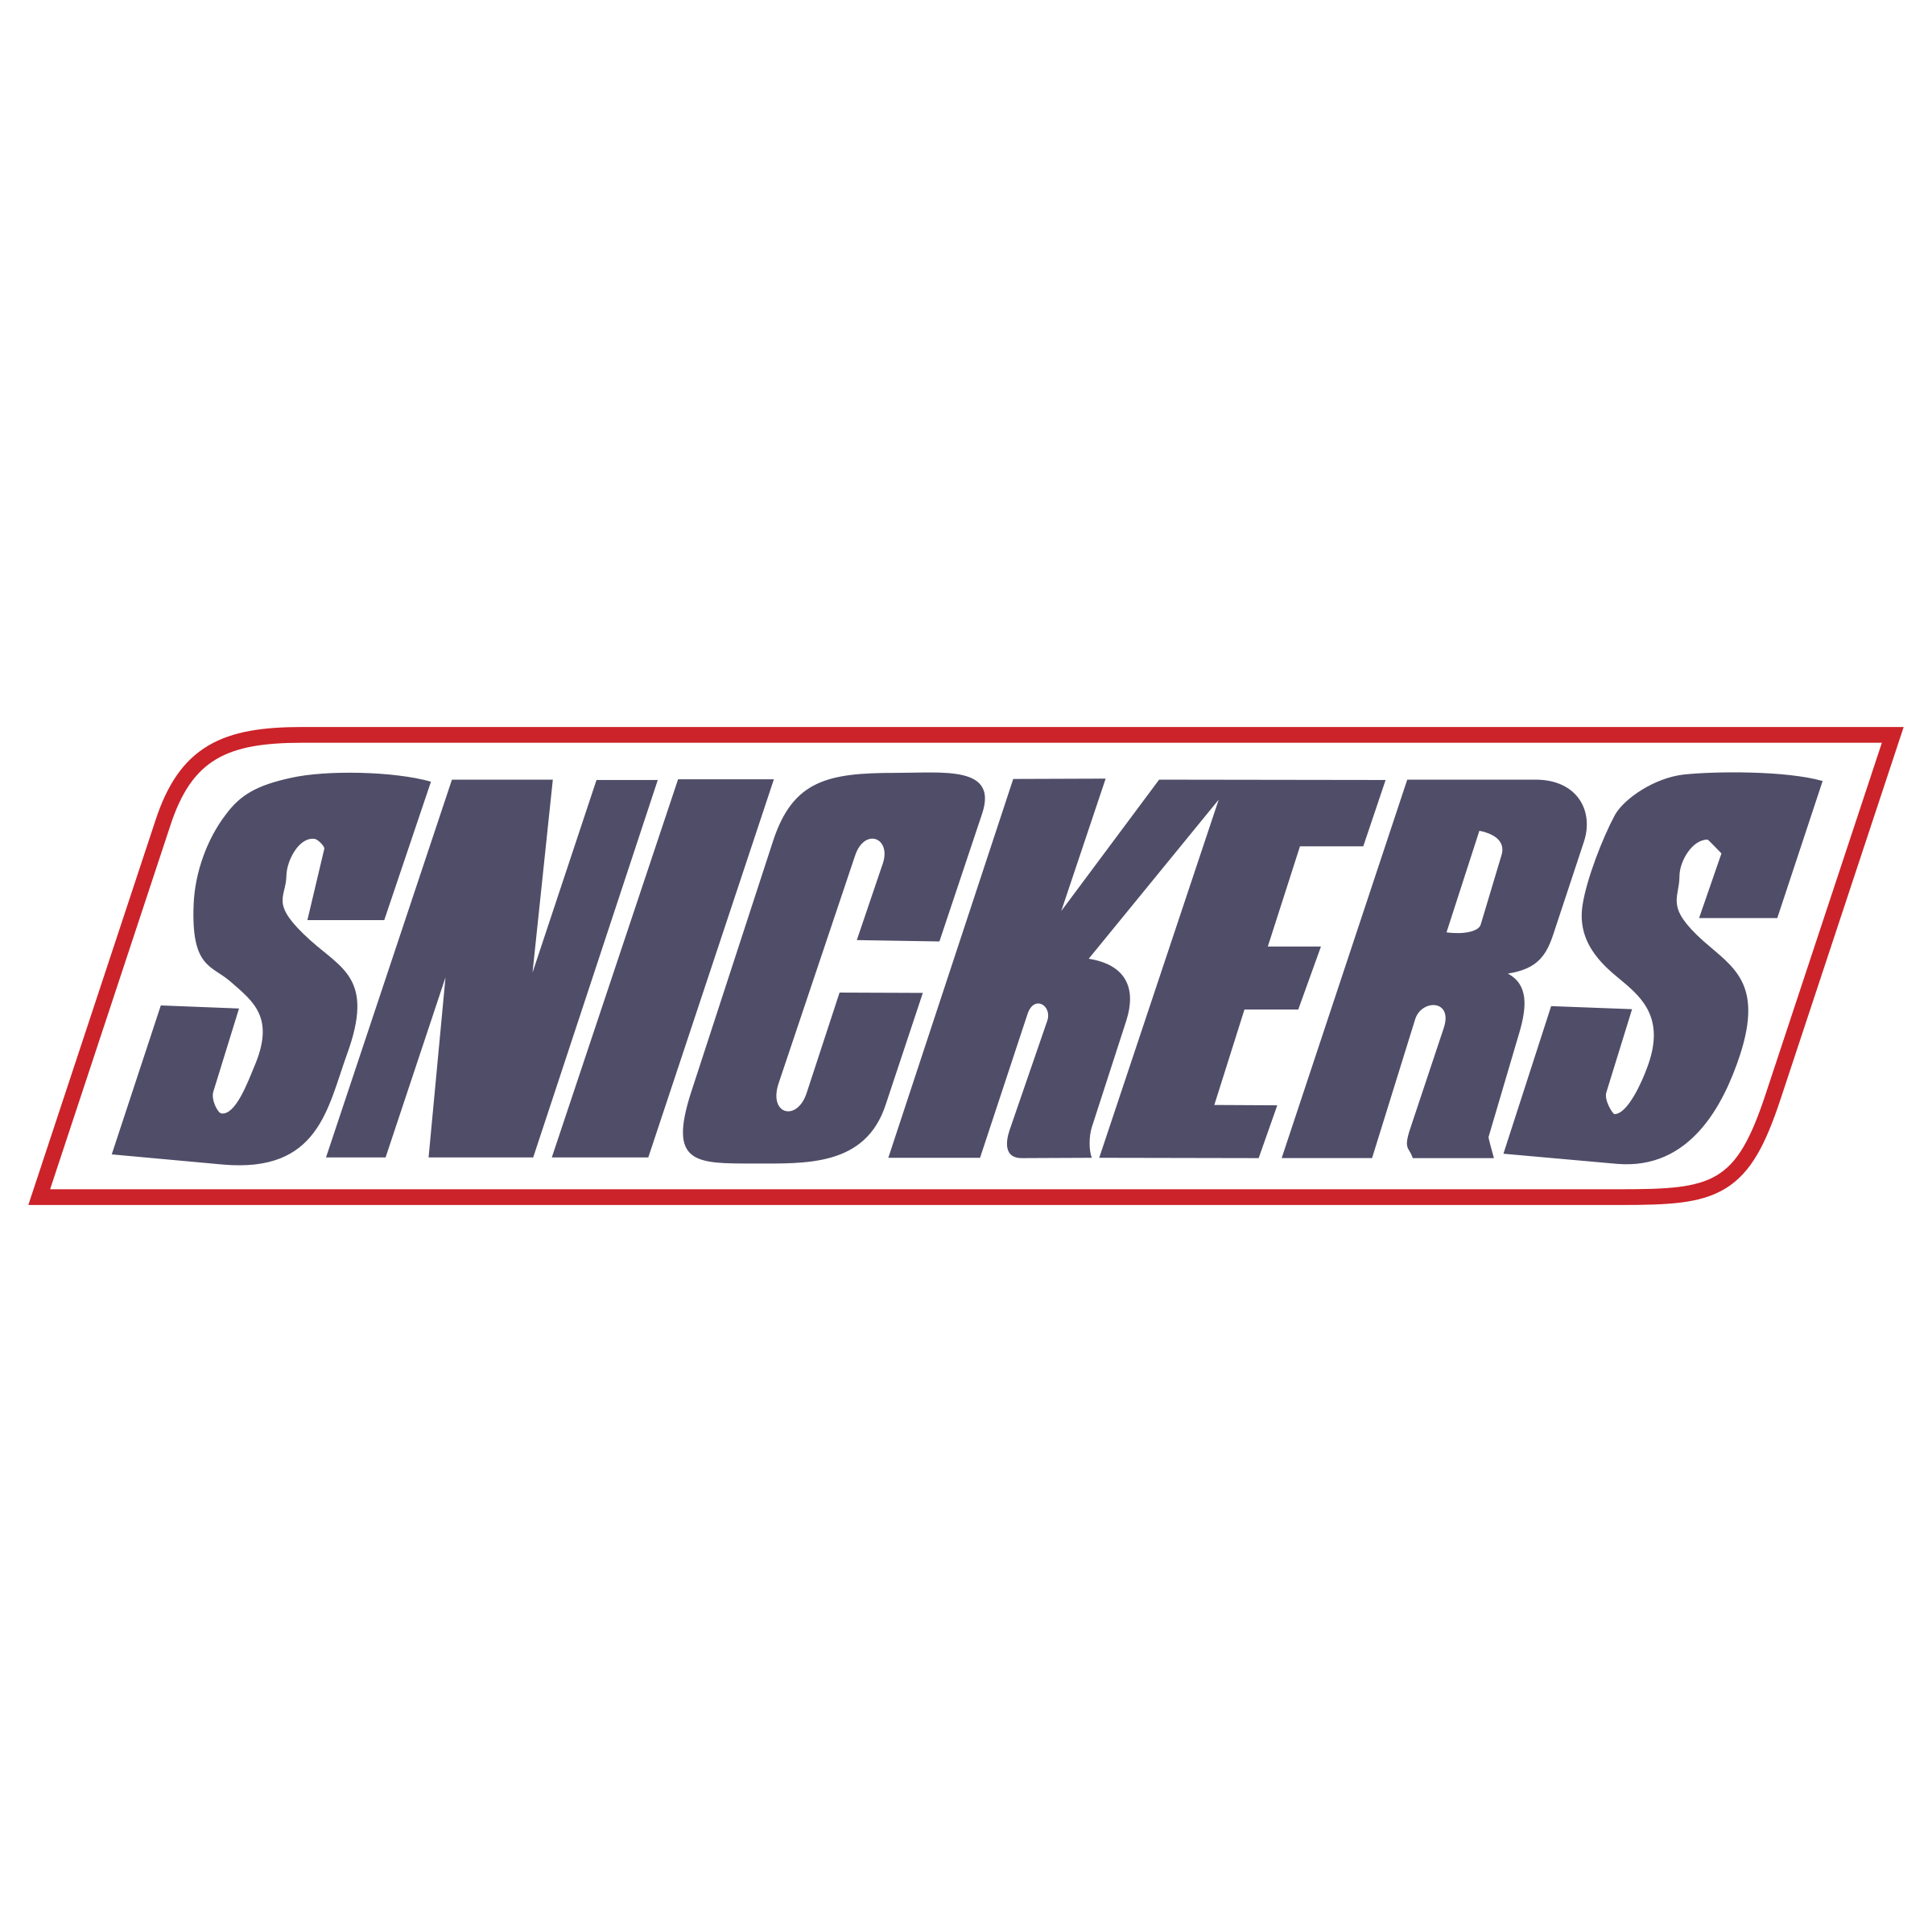 Snickers Logo - Snickers Logo PNG Transparent & SVG Vector - Freebie Supply